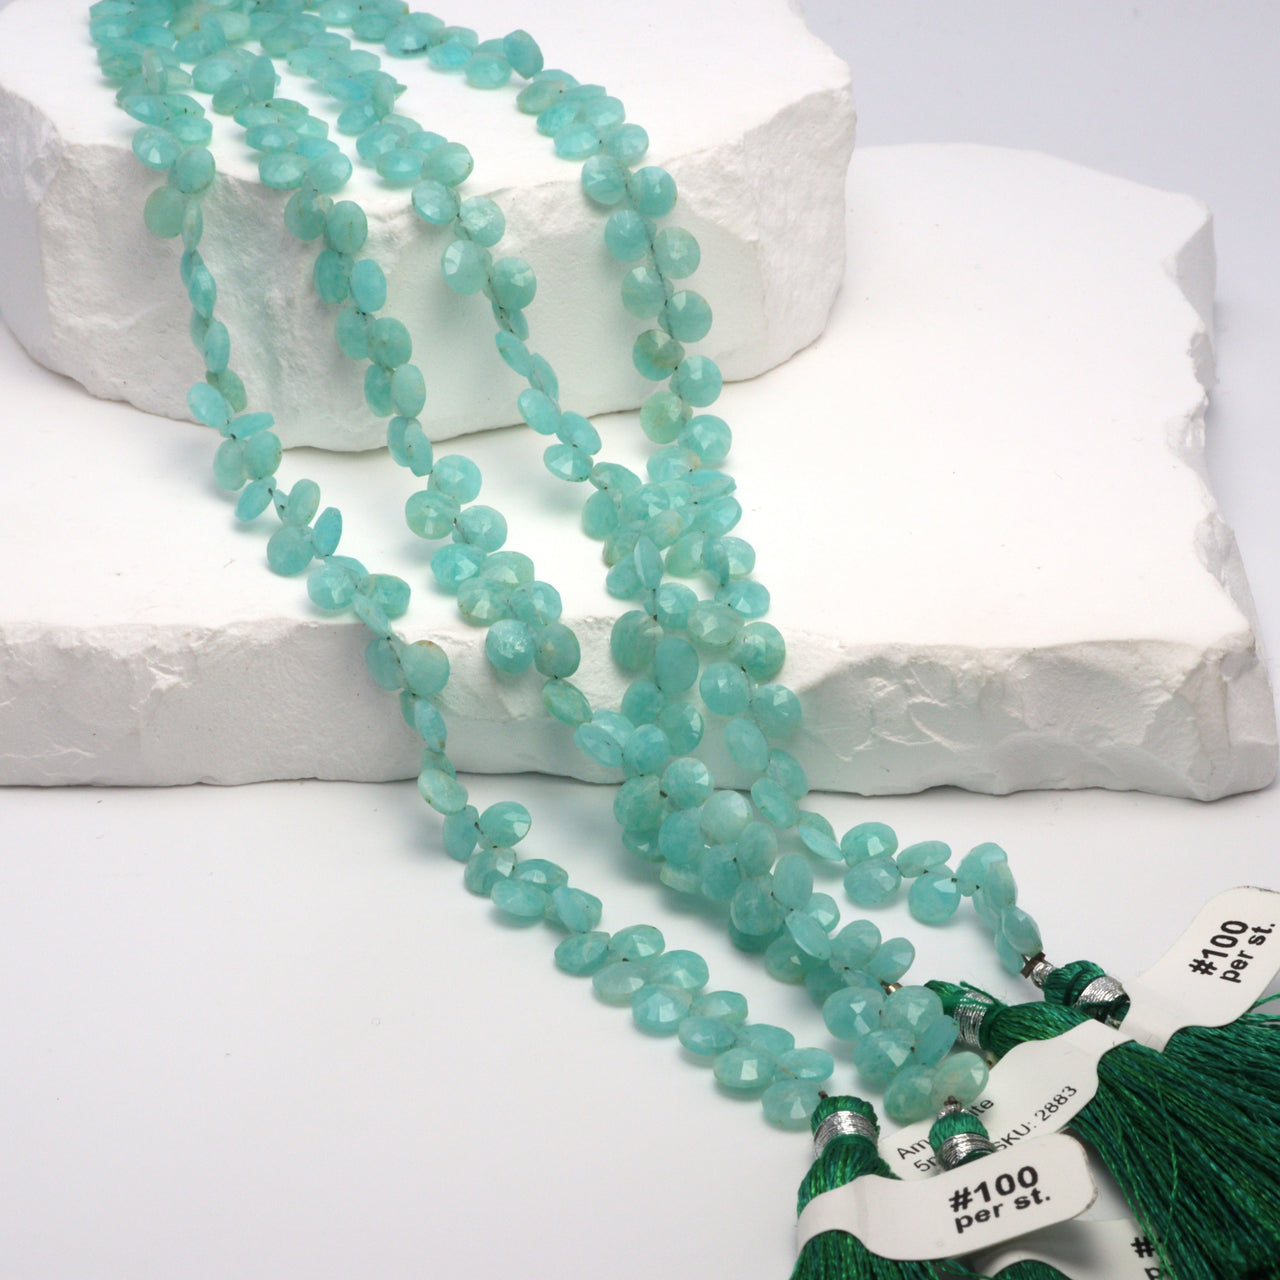 Amazonite 5mm Faceted Heart Shaped Briolettes